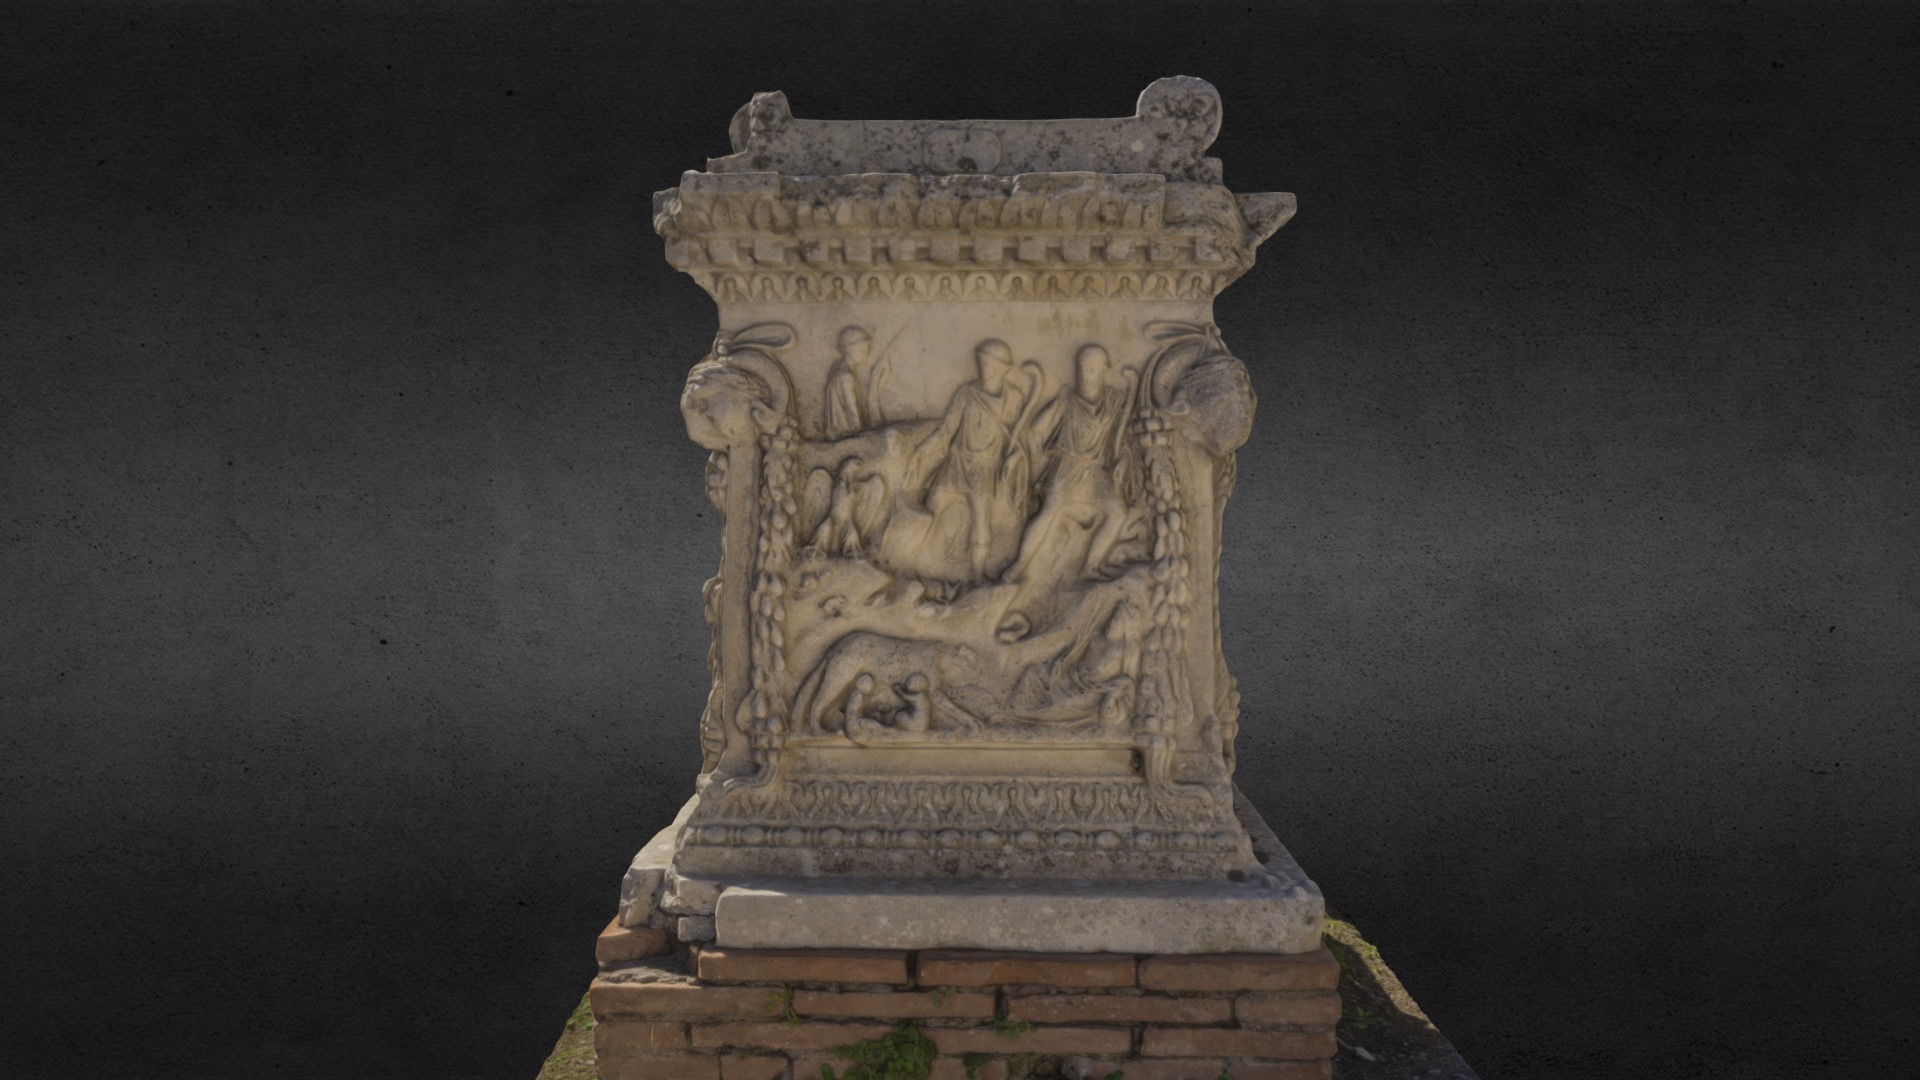 3D model 2018 – Altare di Romolo – Ostia - This is a 3D model of the 2018 - Altare di Romolo - Ostia. The 3D model is about a stone sculpture of a man and a woman.